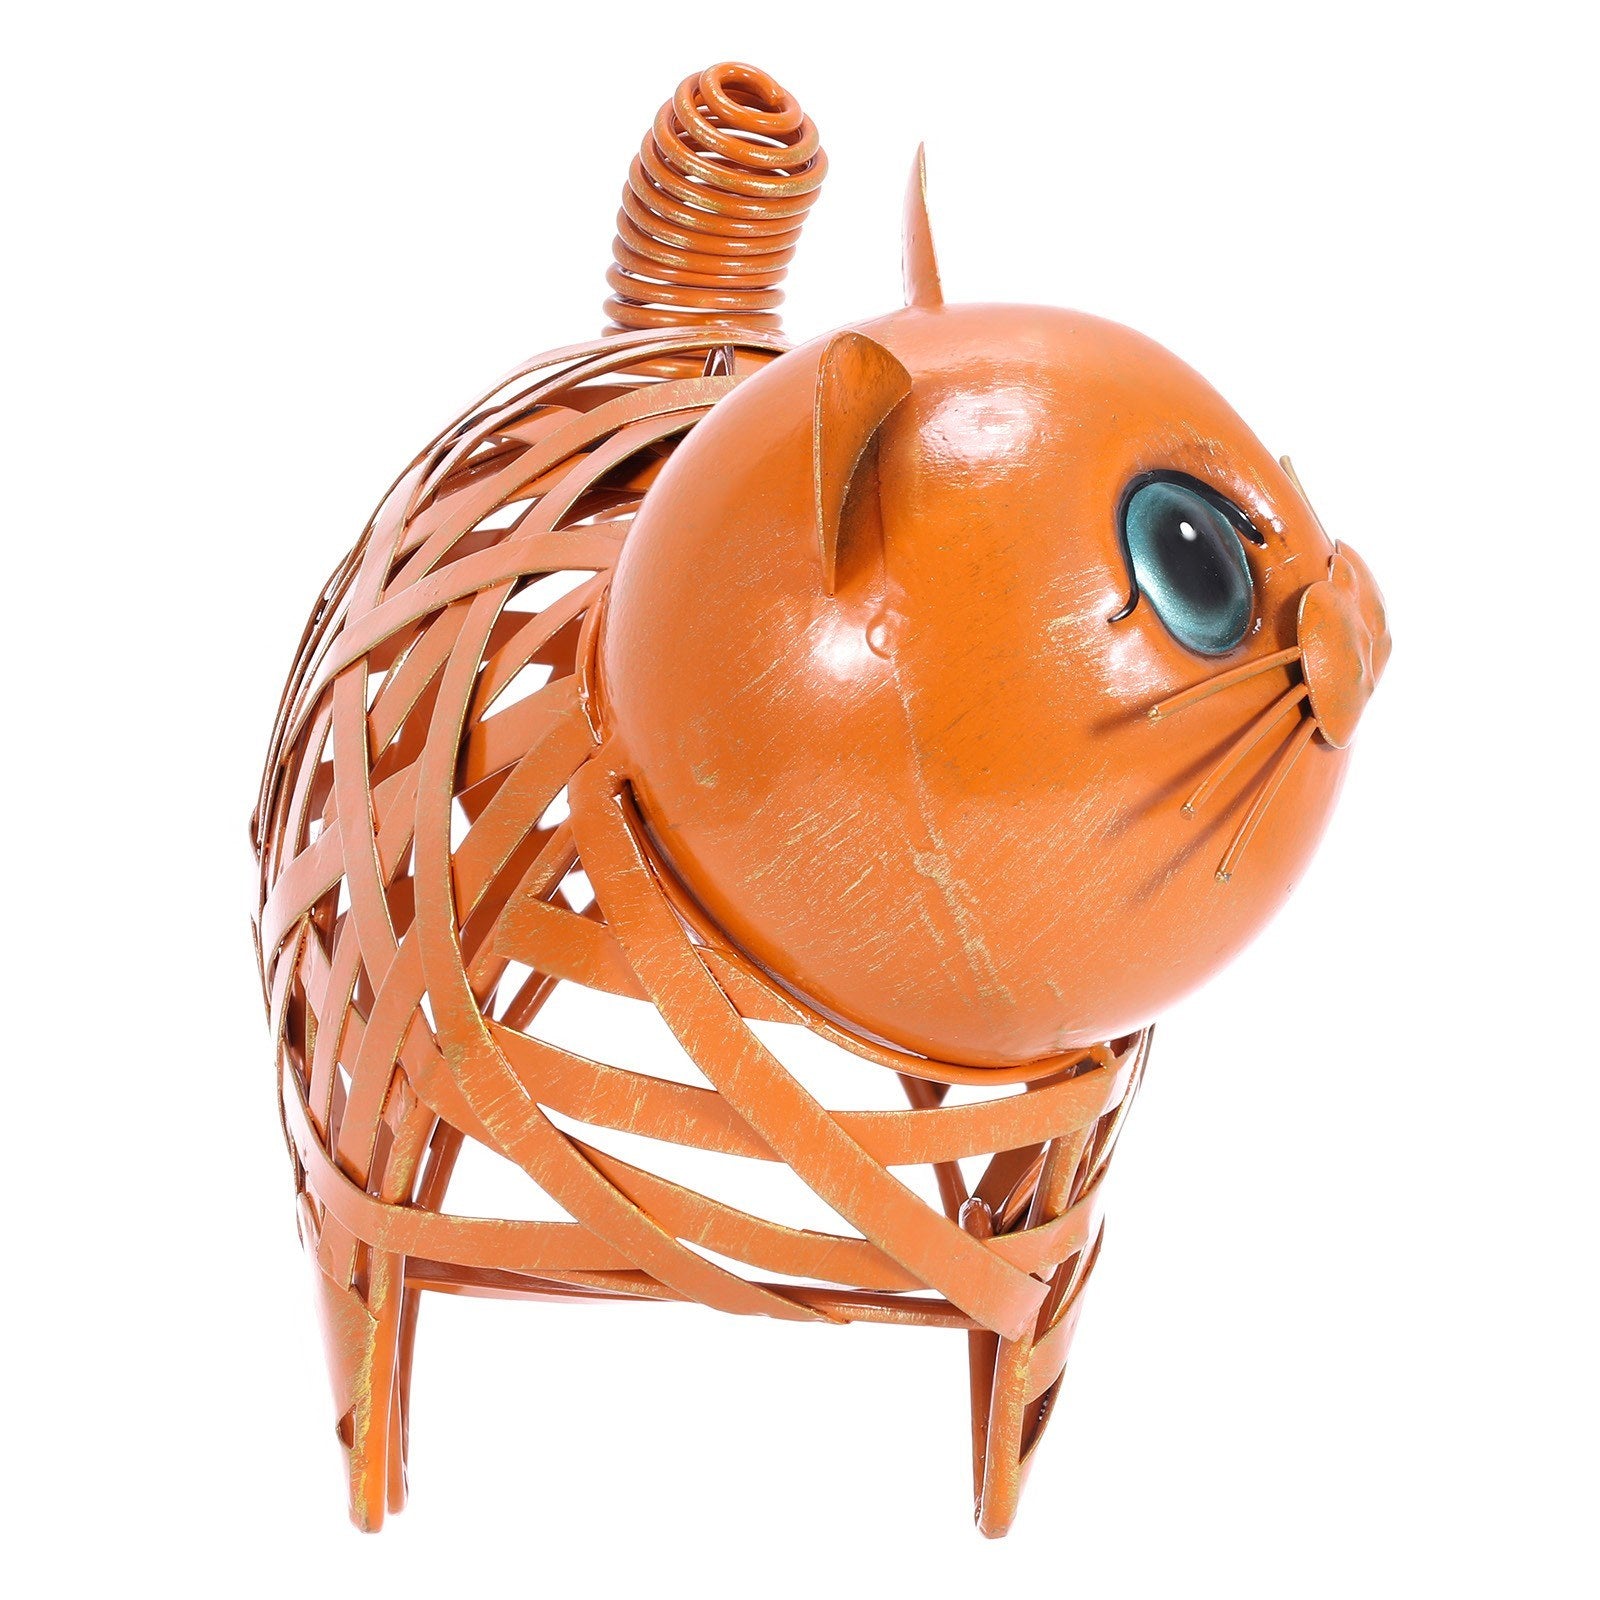 Cat figurine ornament: is a unique gift for all your cat lovers-owners!